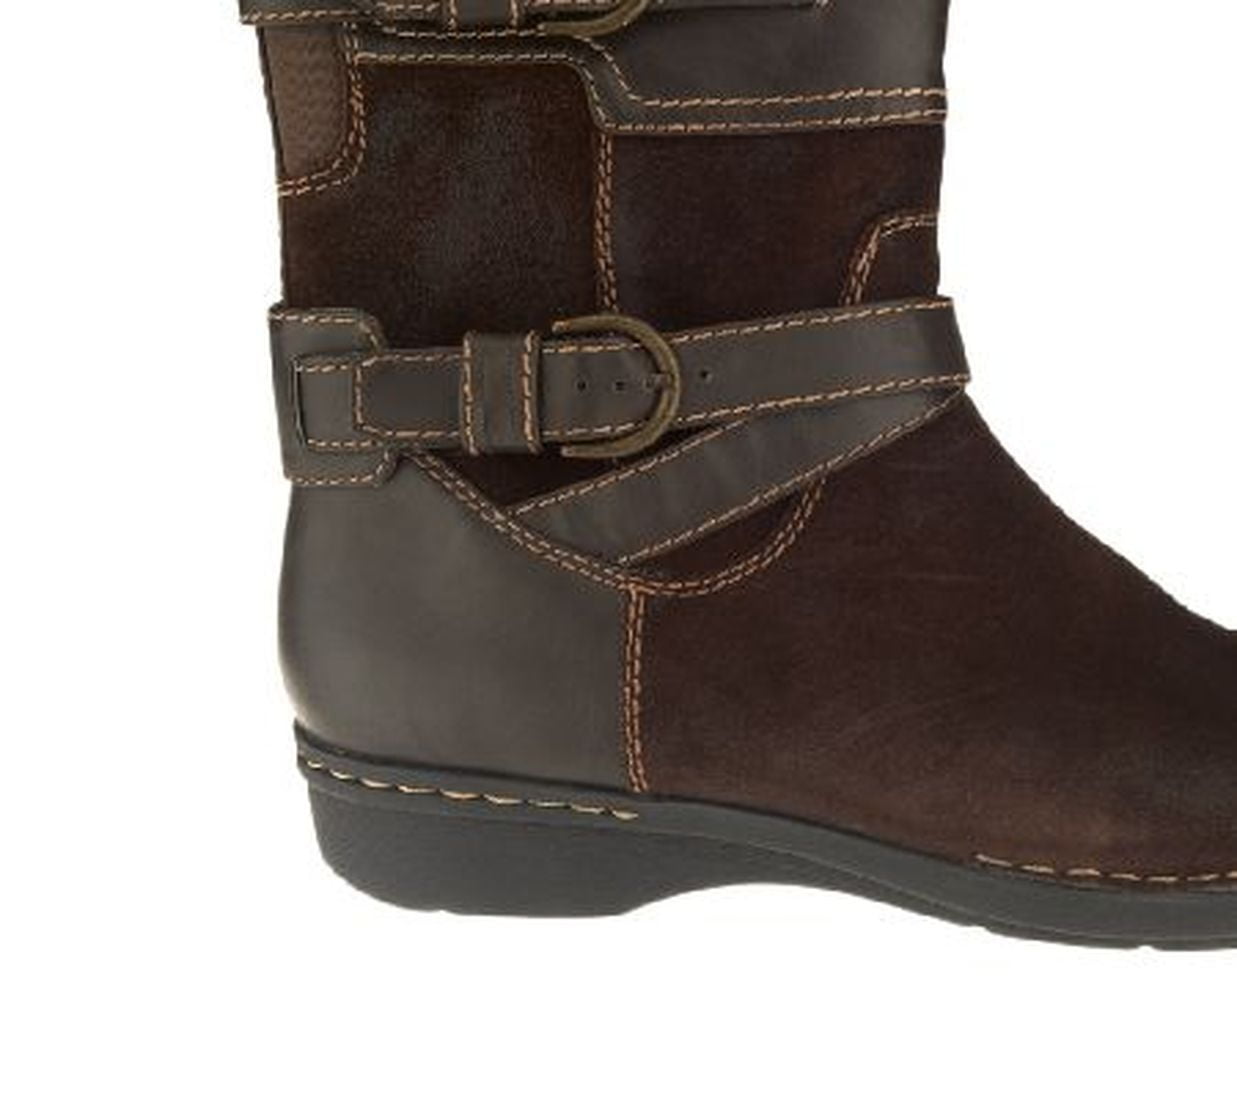 clarks bendables whistle ranch boots